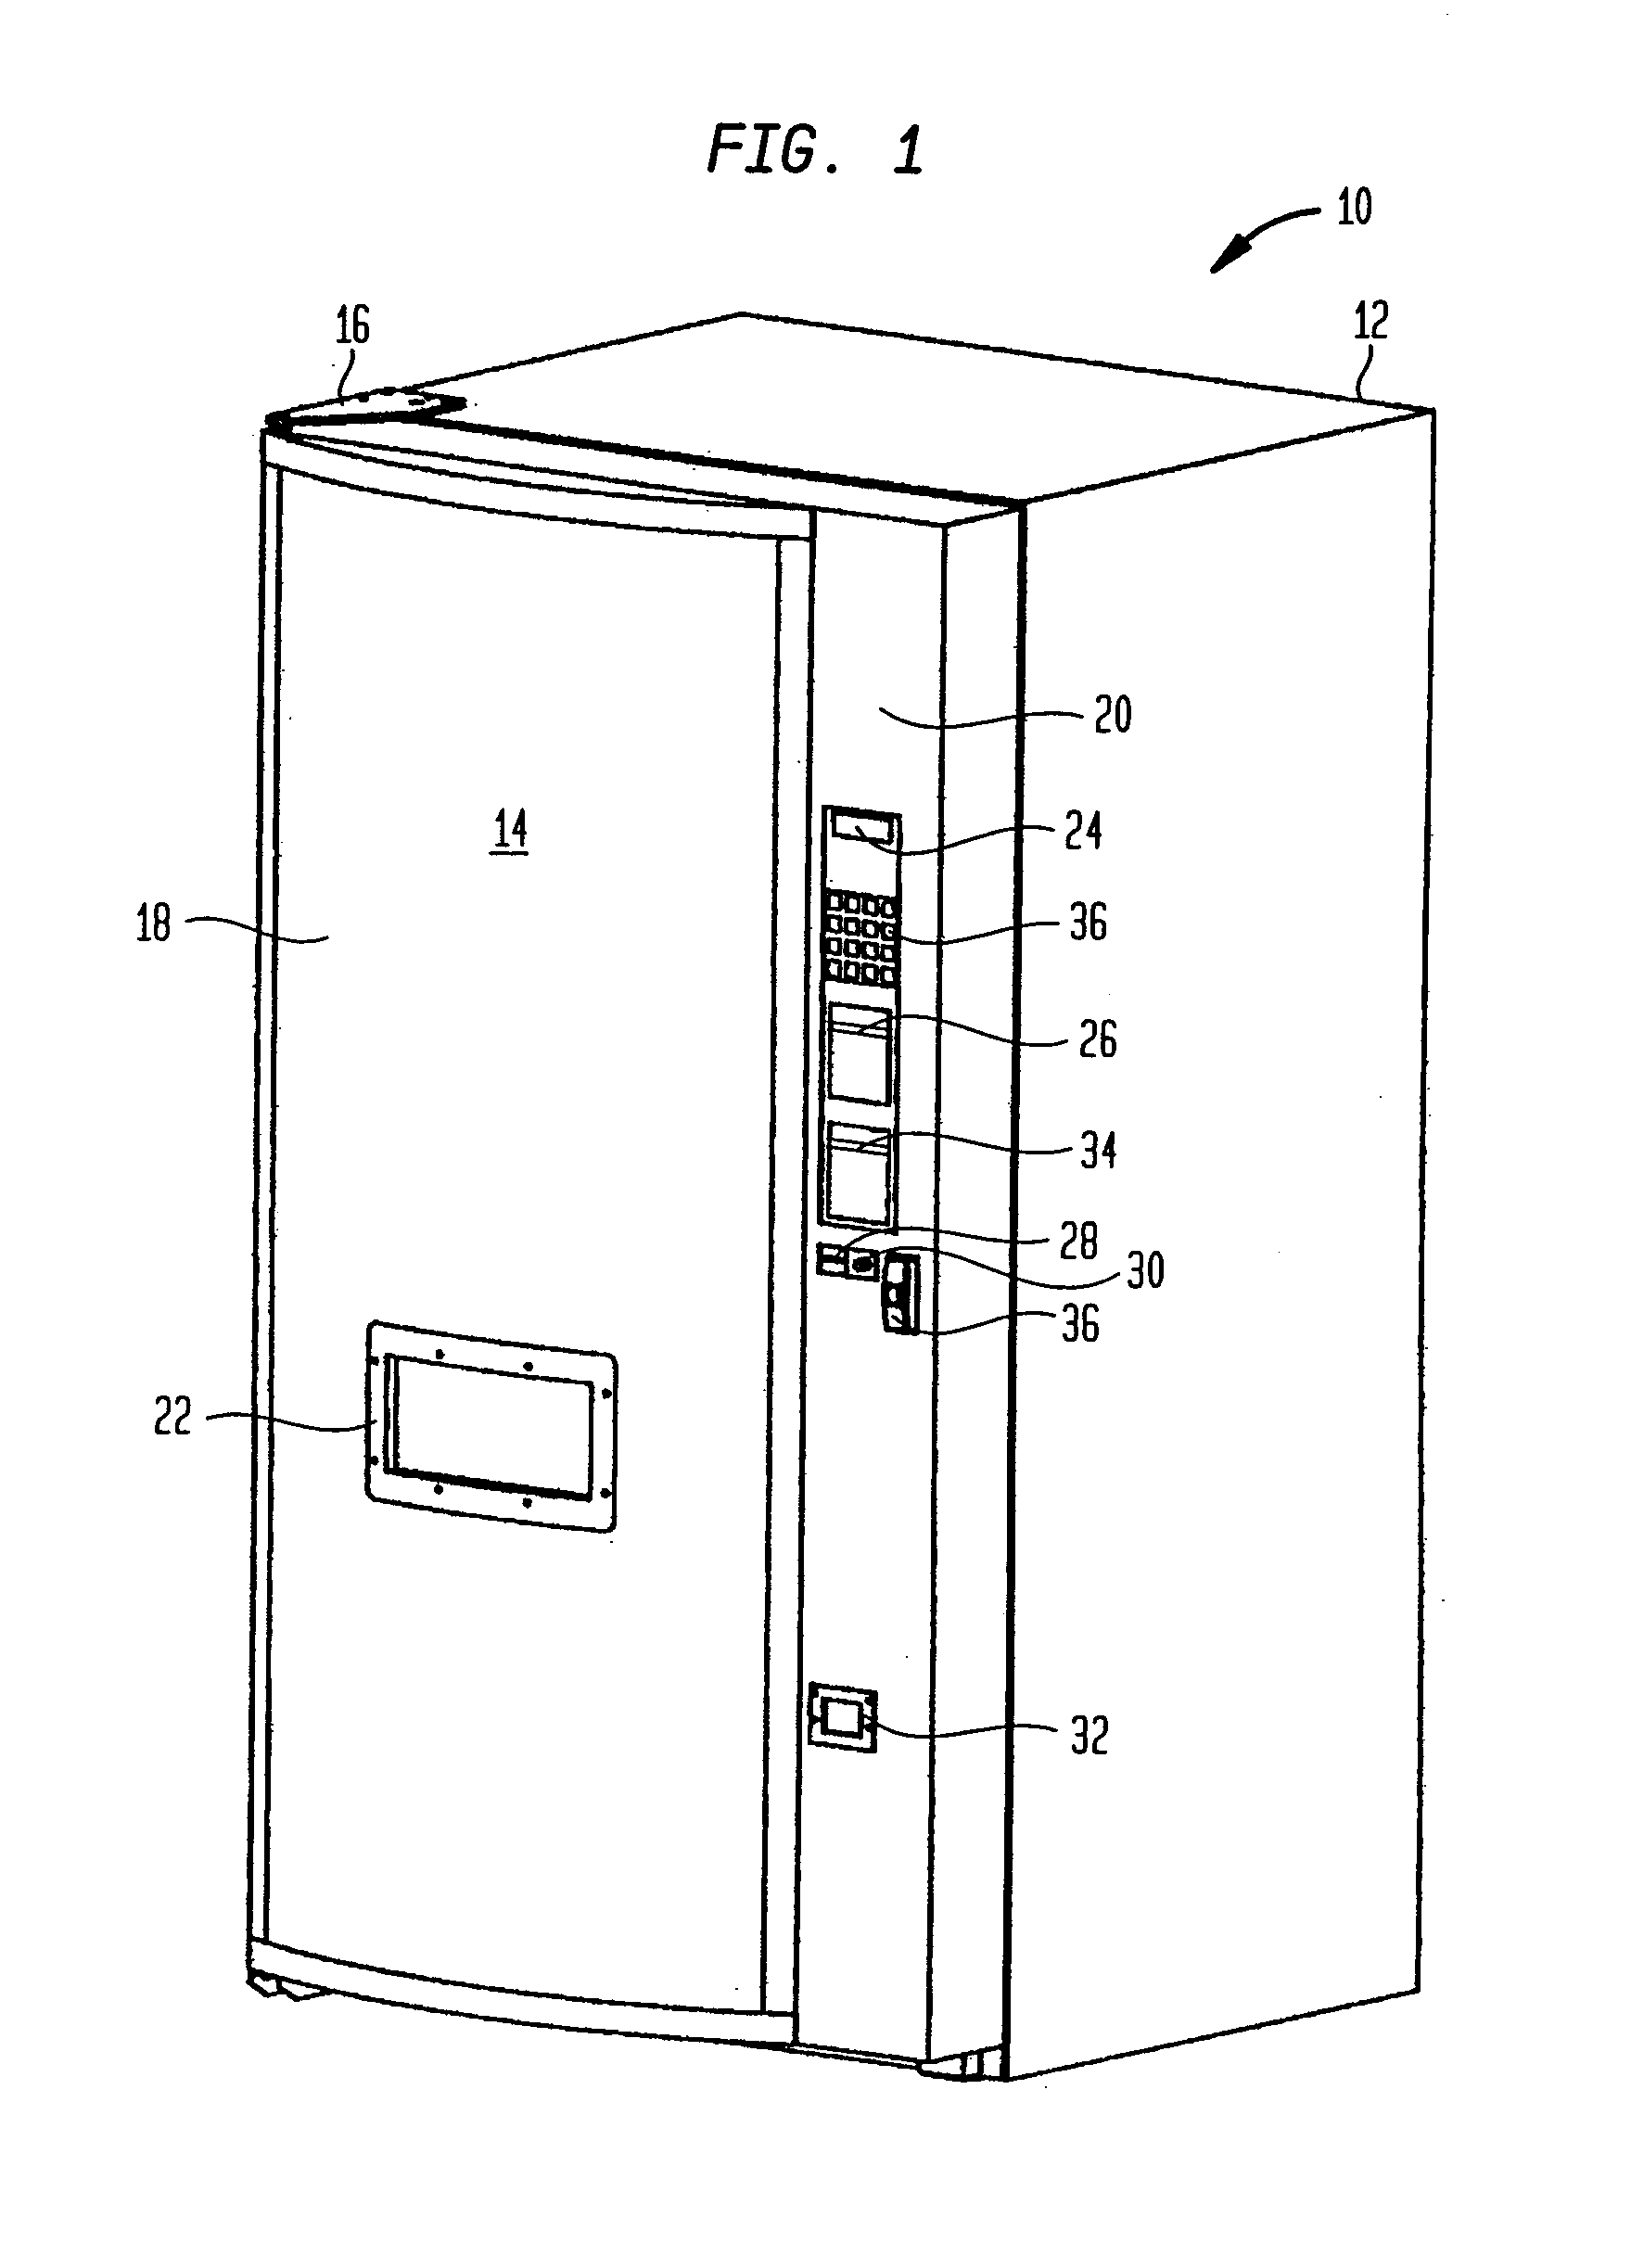 Method and apparatus for controlling a vending machine